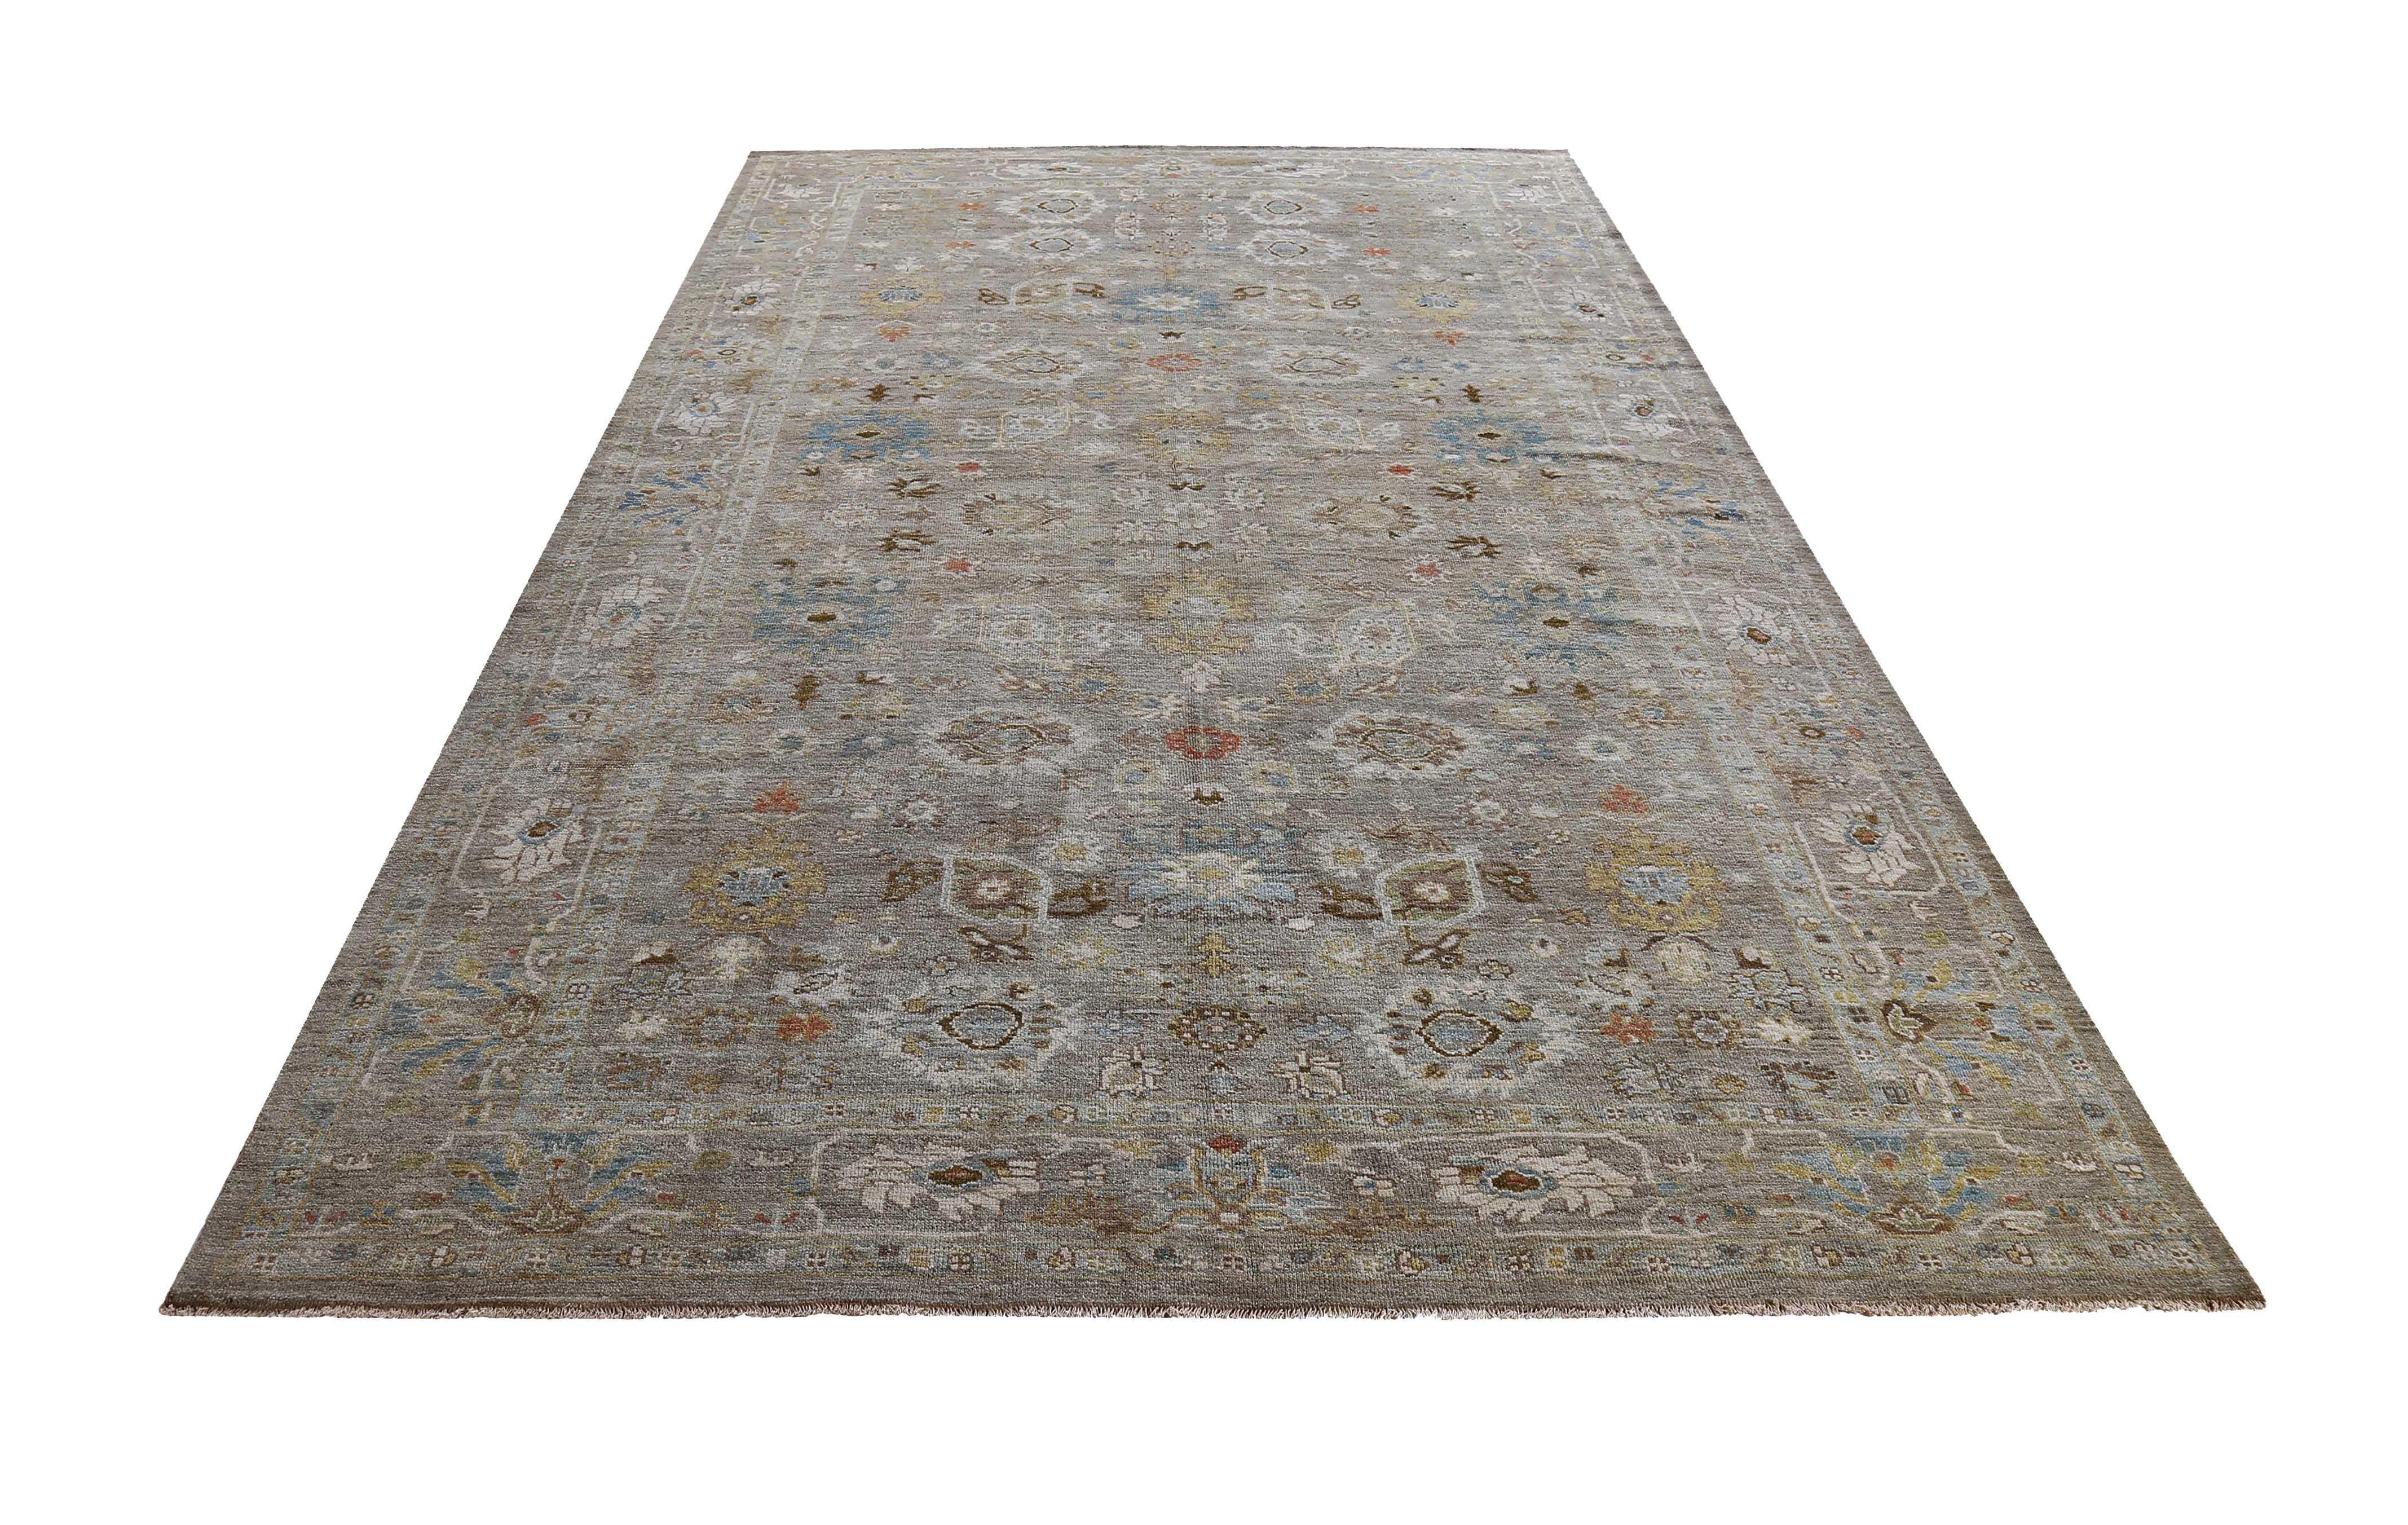 New handmade Turkish rug from high quality sheep’s wool and colored with eco-friendly vegetable dyes that are proven safe for humans and pets alike. It’s a classic Sultanabad design showcasing a lovely gray field with prominent Herati flower heads